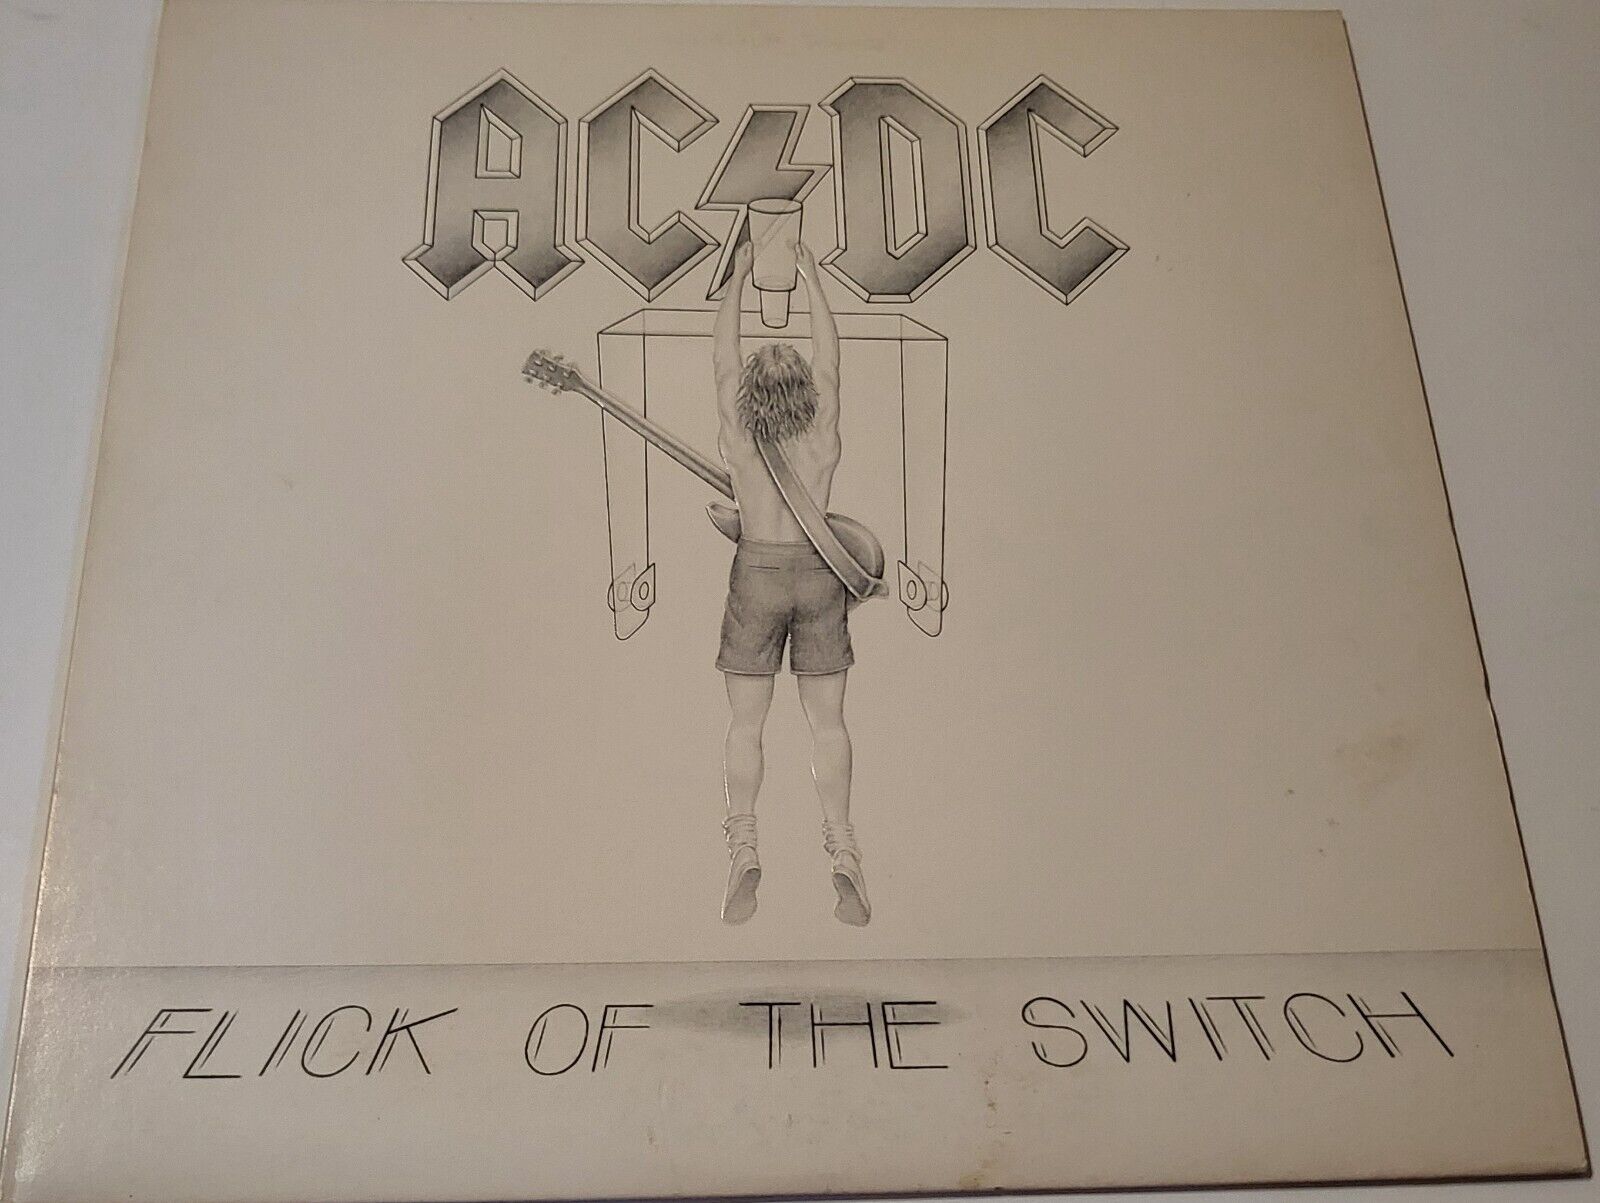 AC/DC  Flick of The Switch  1983  Atlantic 80100-1  Hard Rock Embossed Sleeve VG